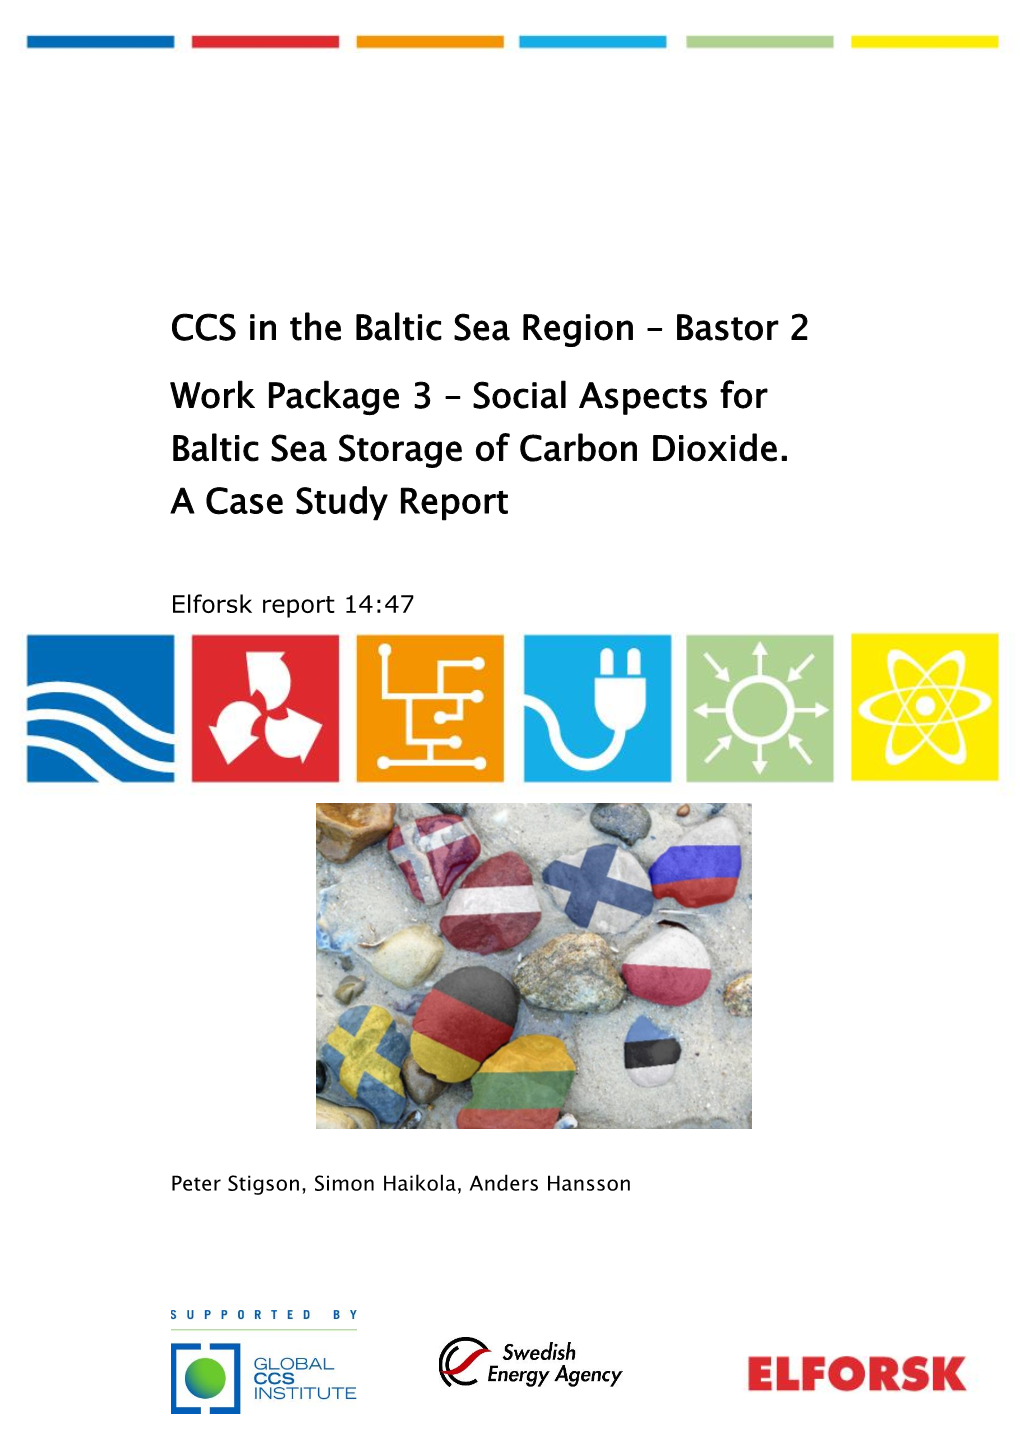 Social Aspects for Baltic Sea Storage of Carbon Dioxide